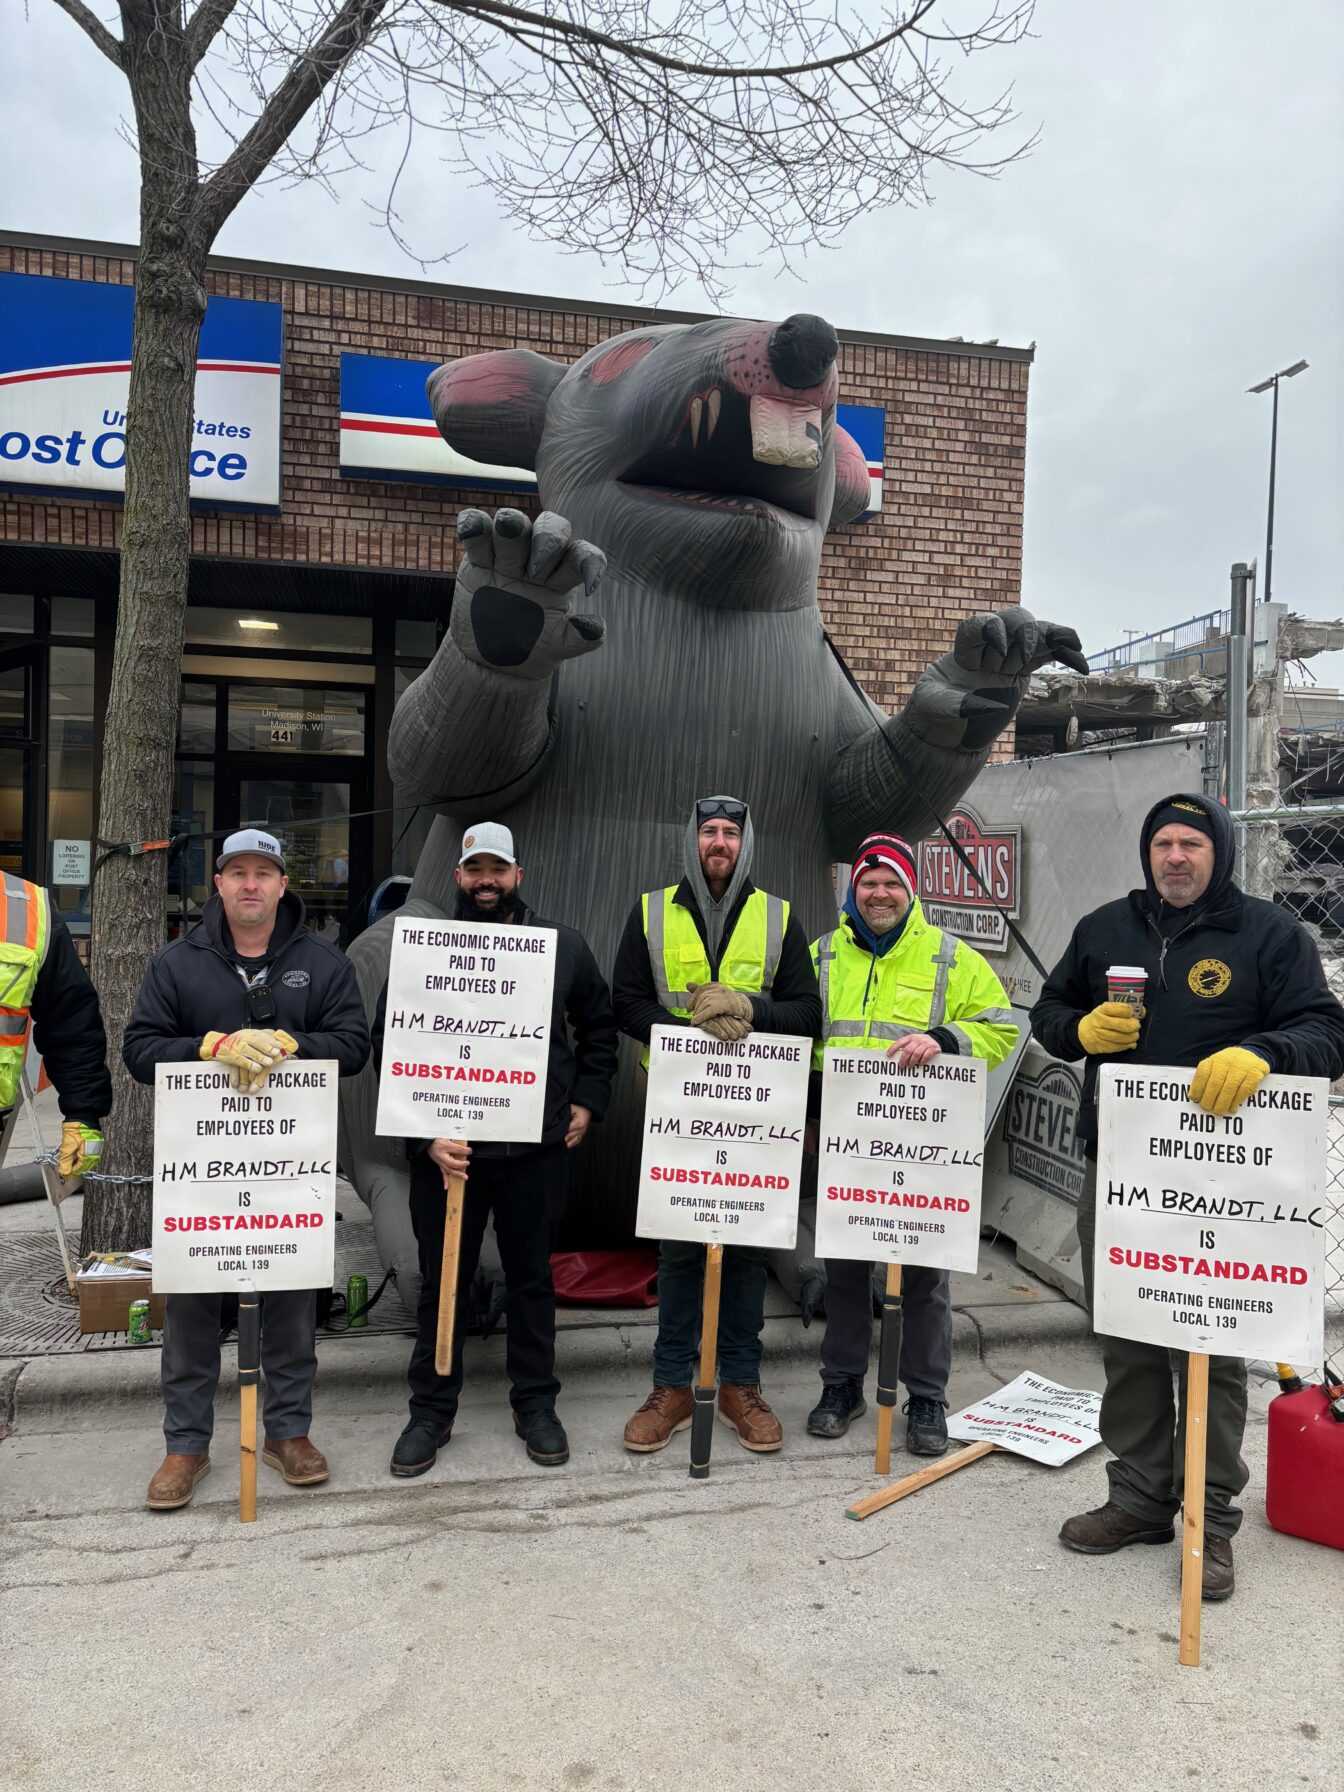 Demolition workers protesting HM Brandt, LLC outside of their downtown worksite in February.